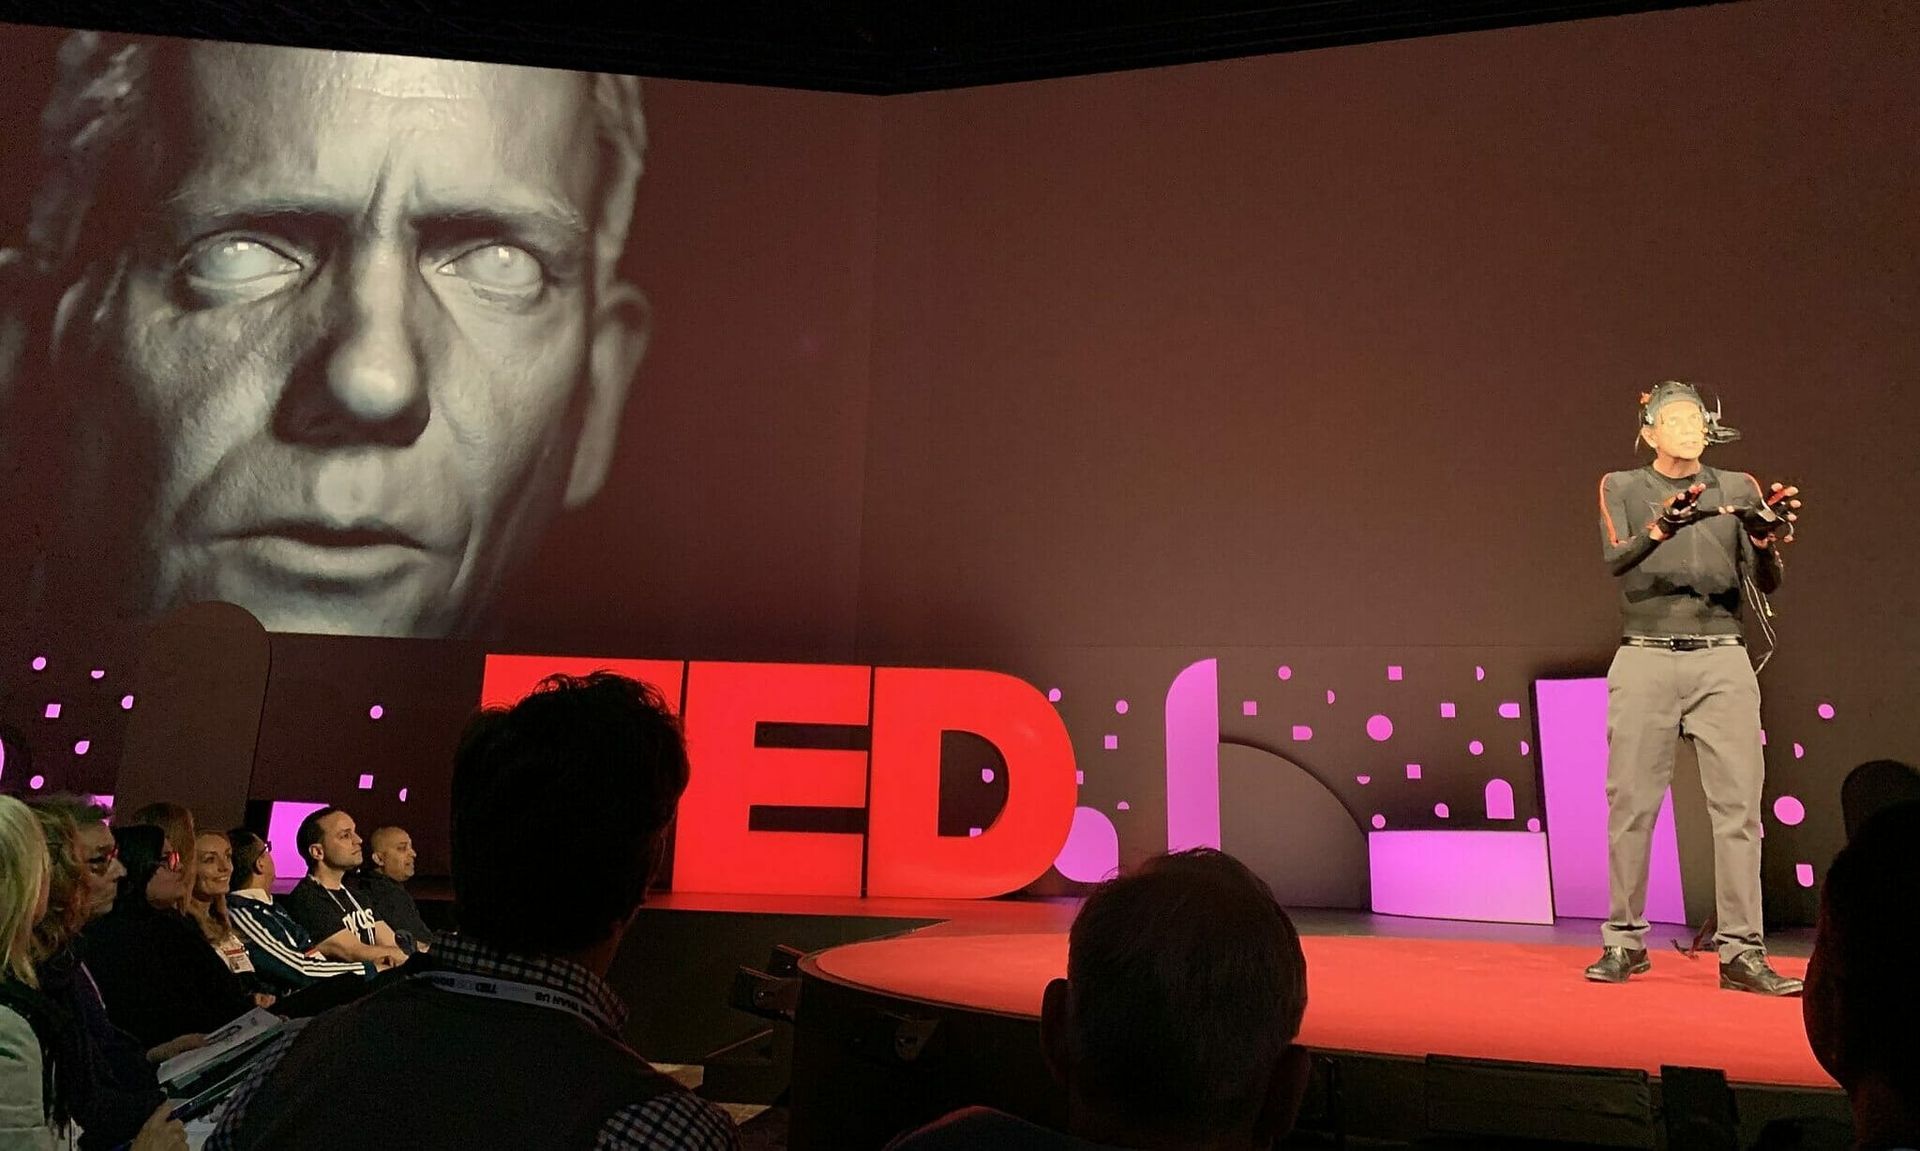 DigiDoug, a deepfake created by at Doug Roble visual effects production company Digital Domain, debuted at his TED talk in 2019. Deepfakes area among the threats that cyber experts predict will come into their own in 2021. (Steve Jurvetson/CC BY 2.0)